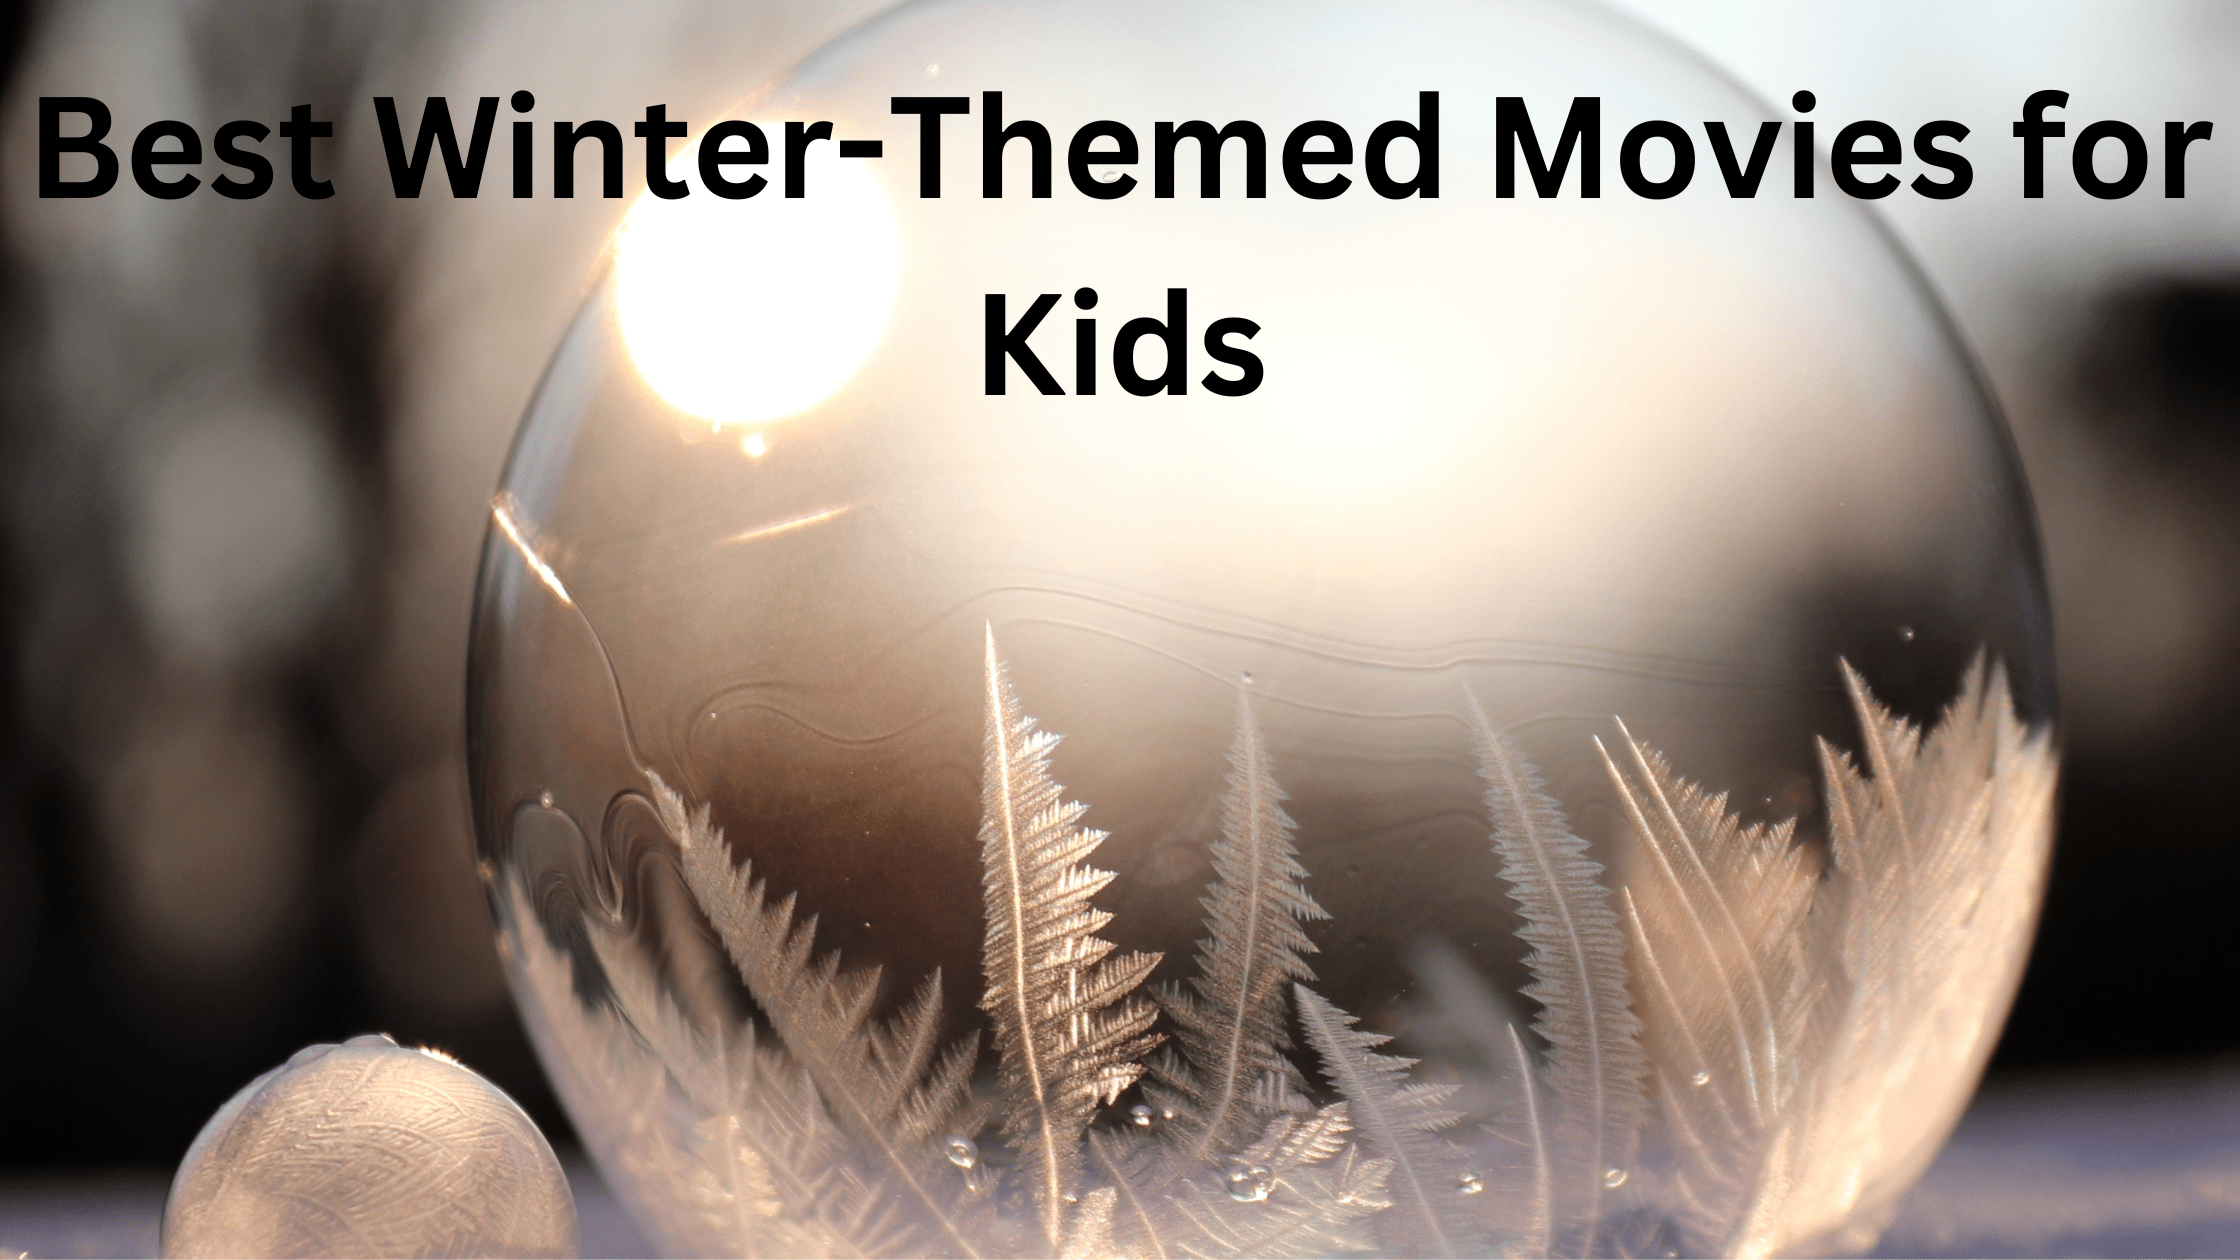 11 Best Winter-Themed Movies for Kids to Watch 8